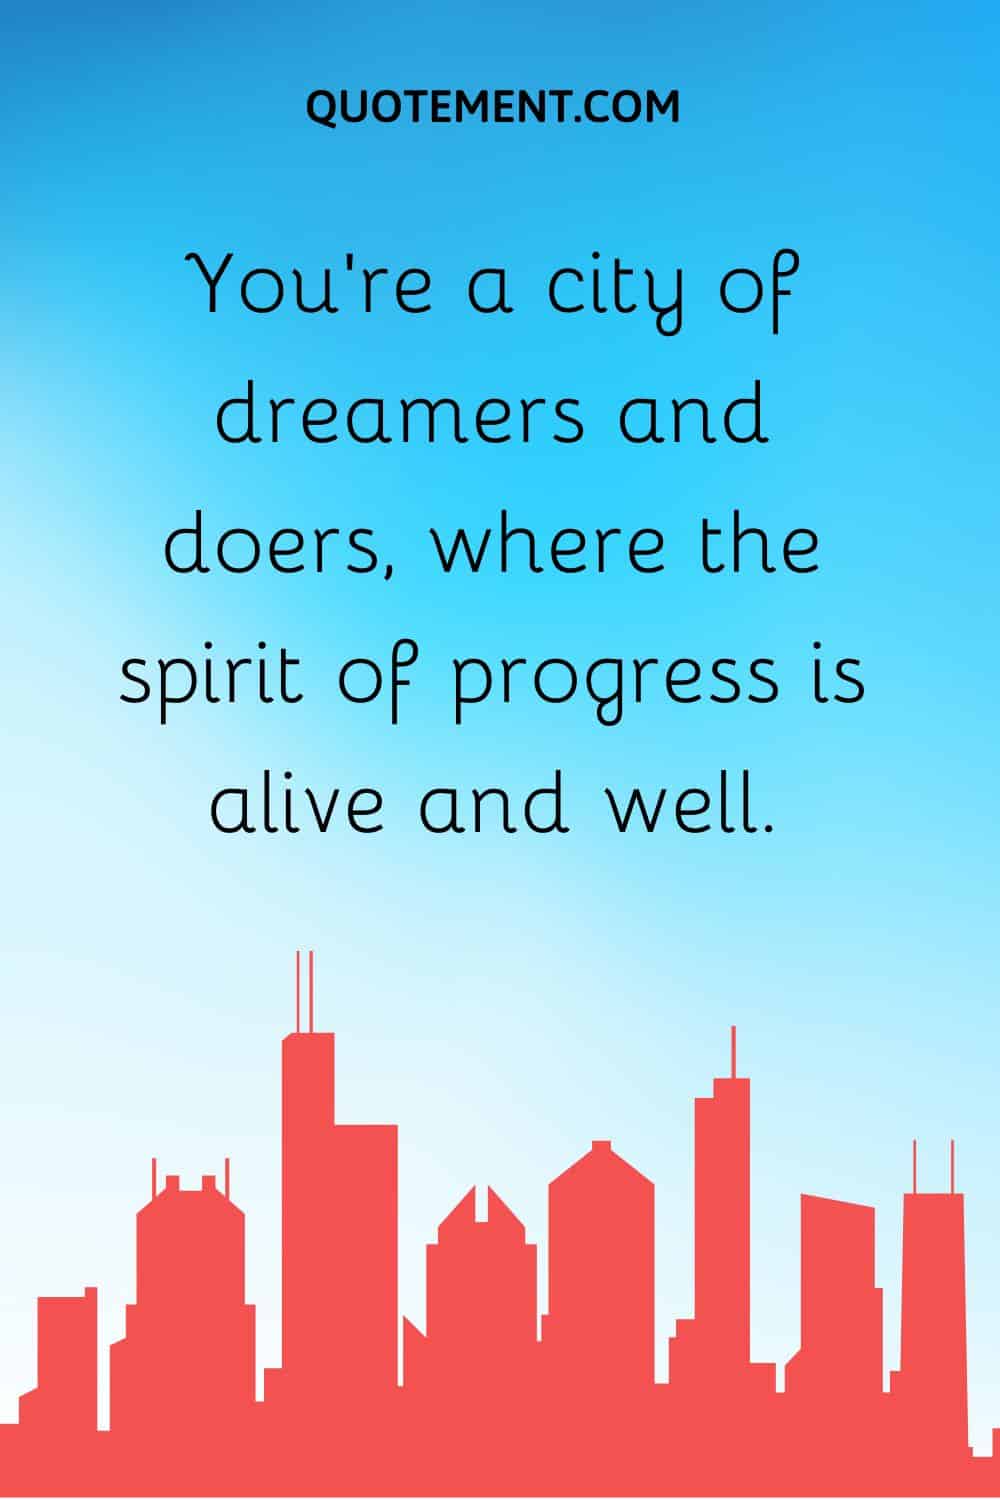 You’re a city of dreamers and doers, where the spirit of progress is alive and well.